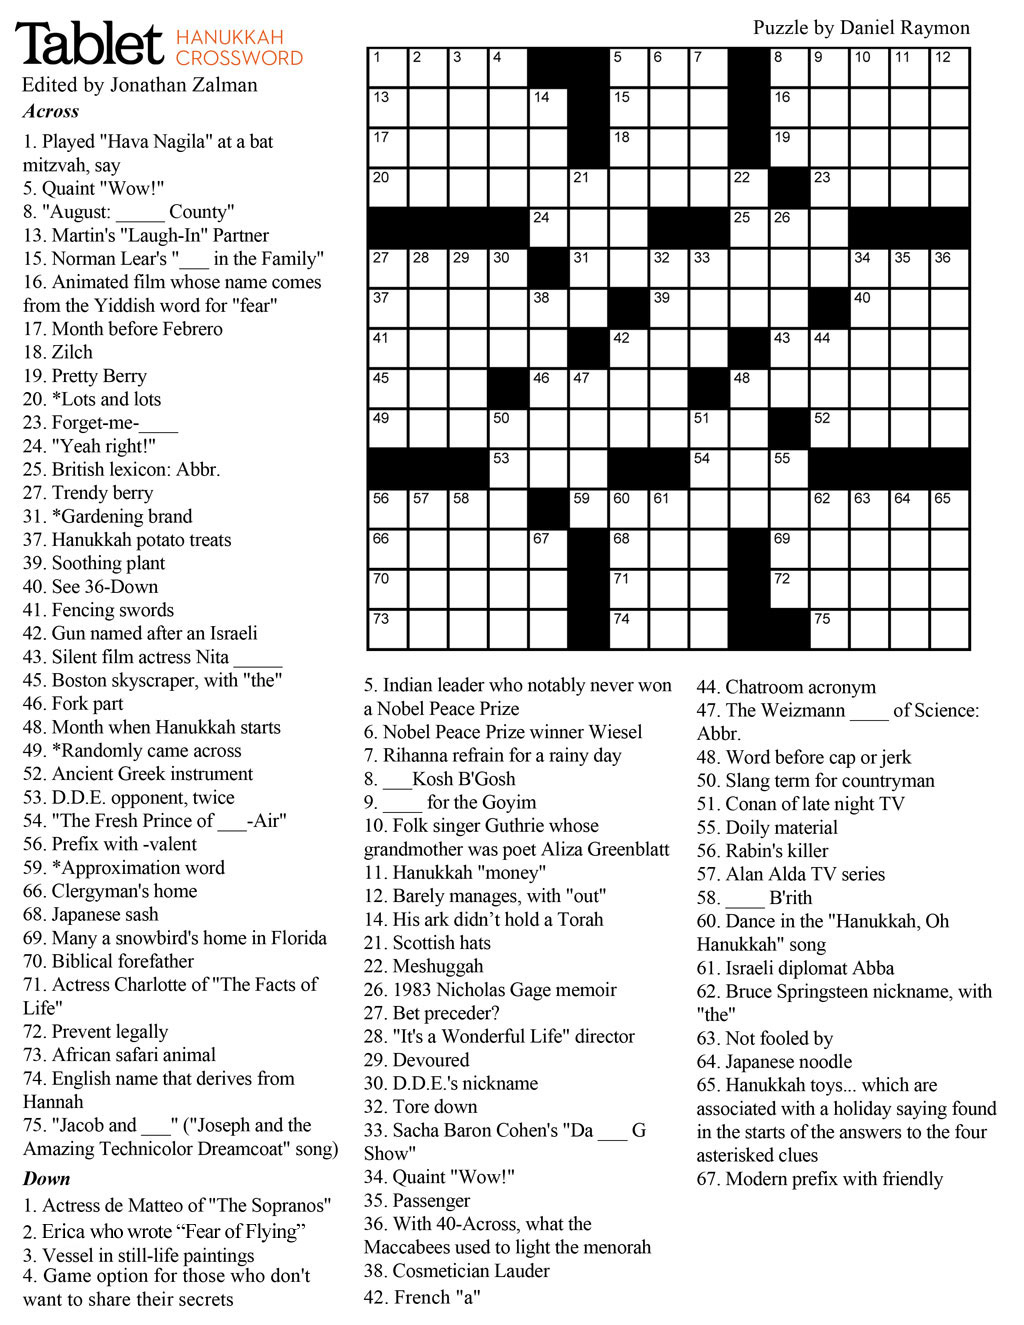 Wind Down With Our Hanukkah Crossword Puzzle! – Tablet Magazine - Printable Daily Puzzles